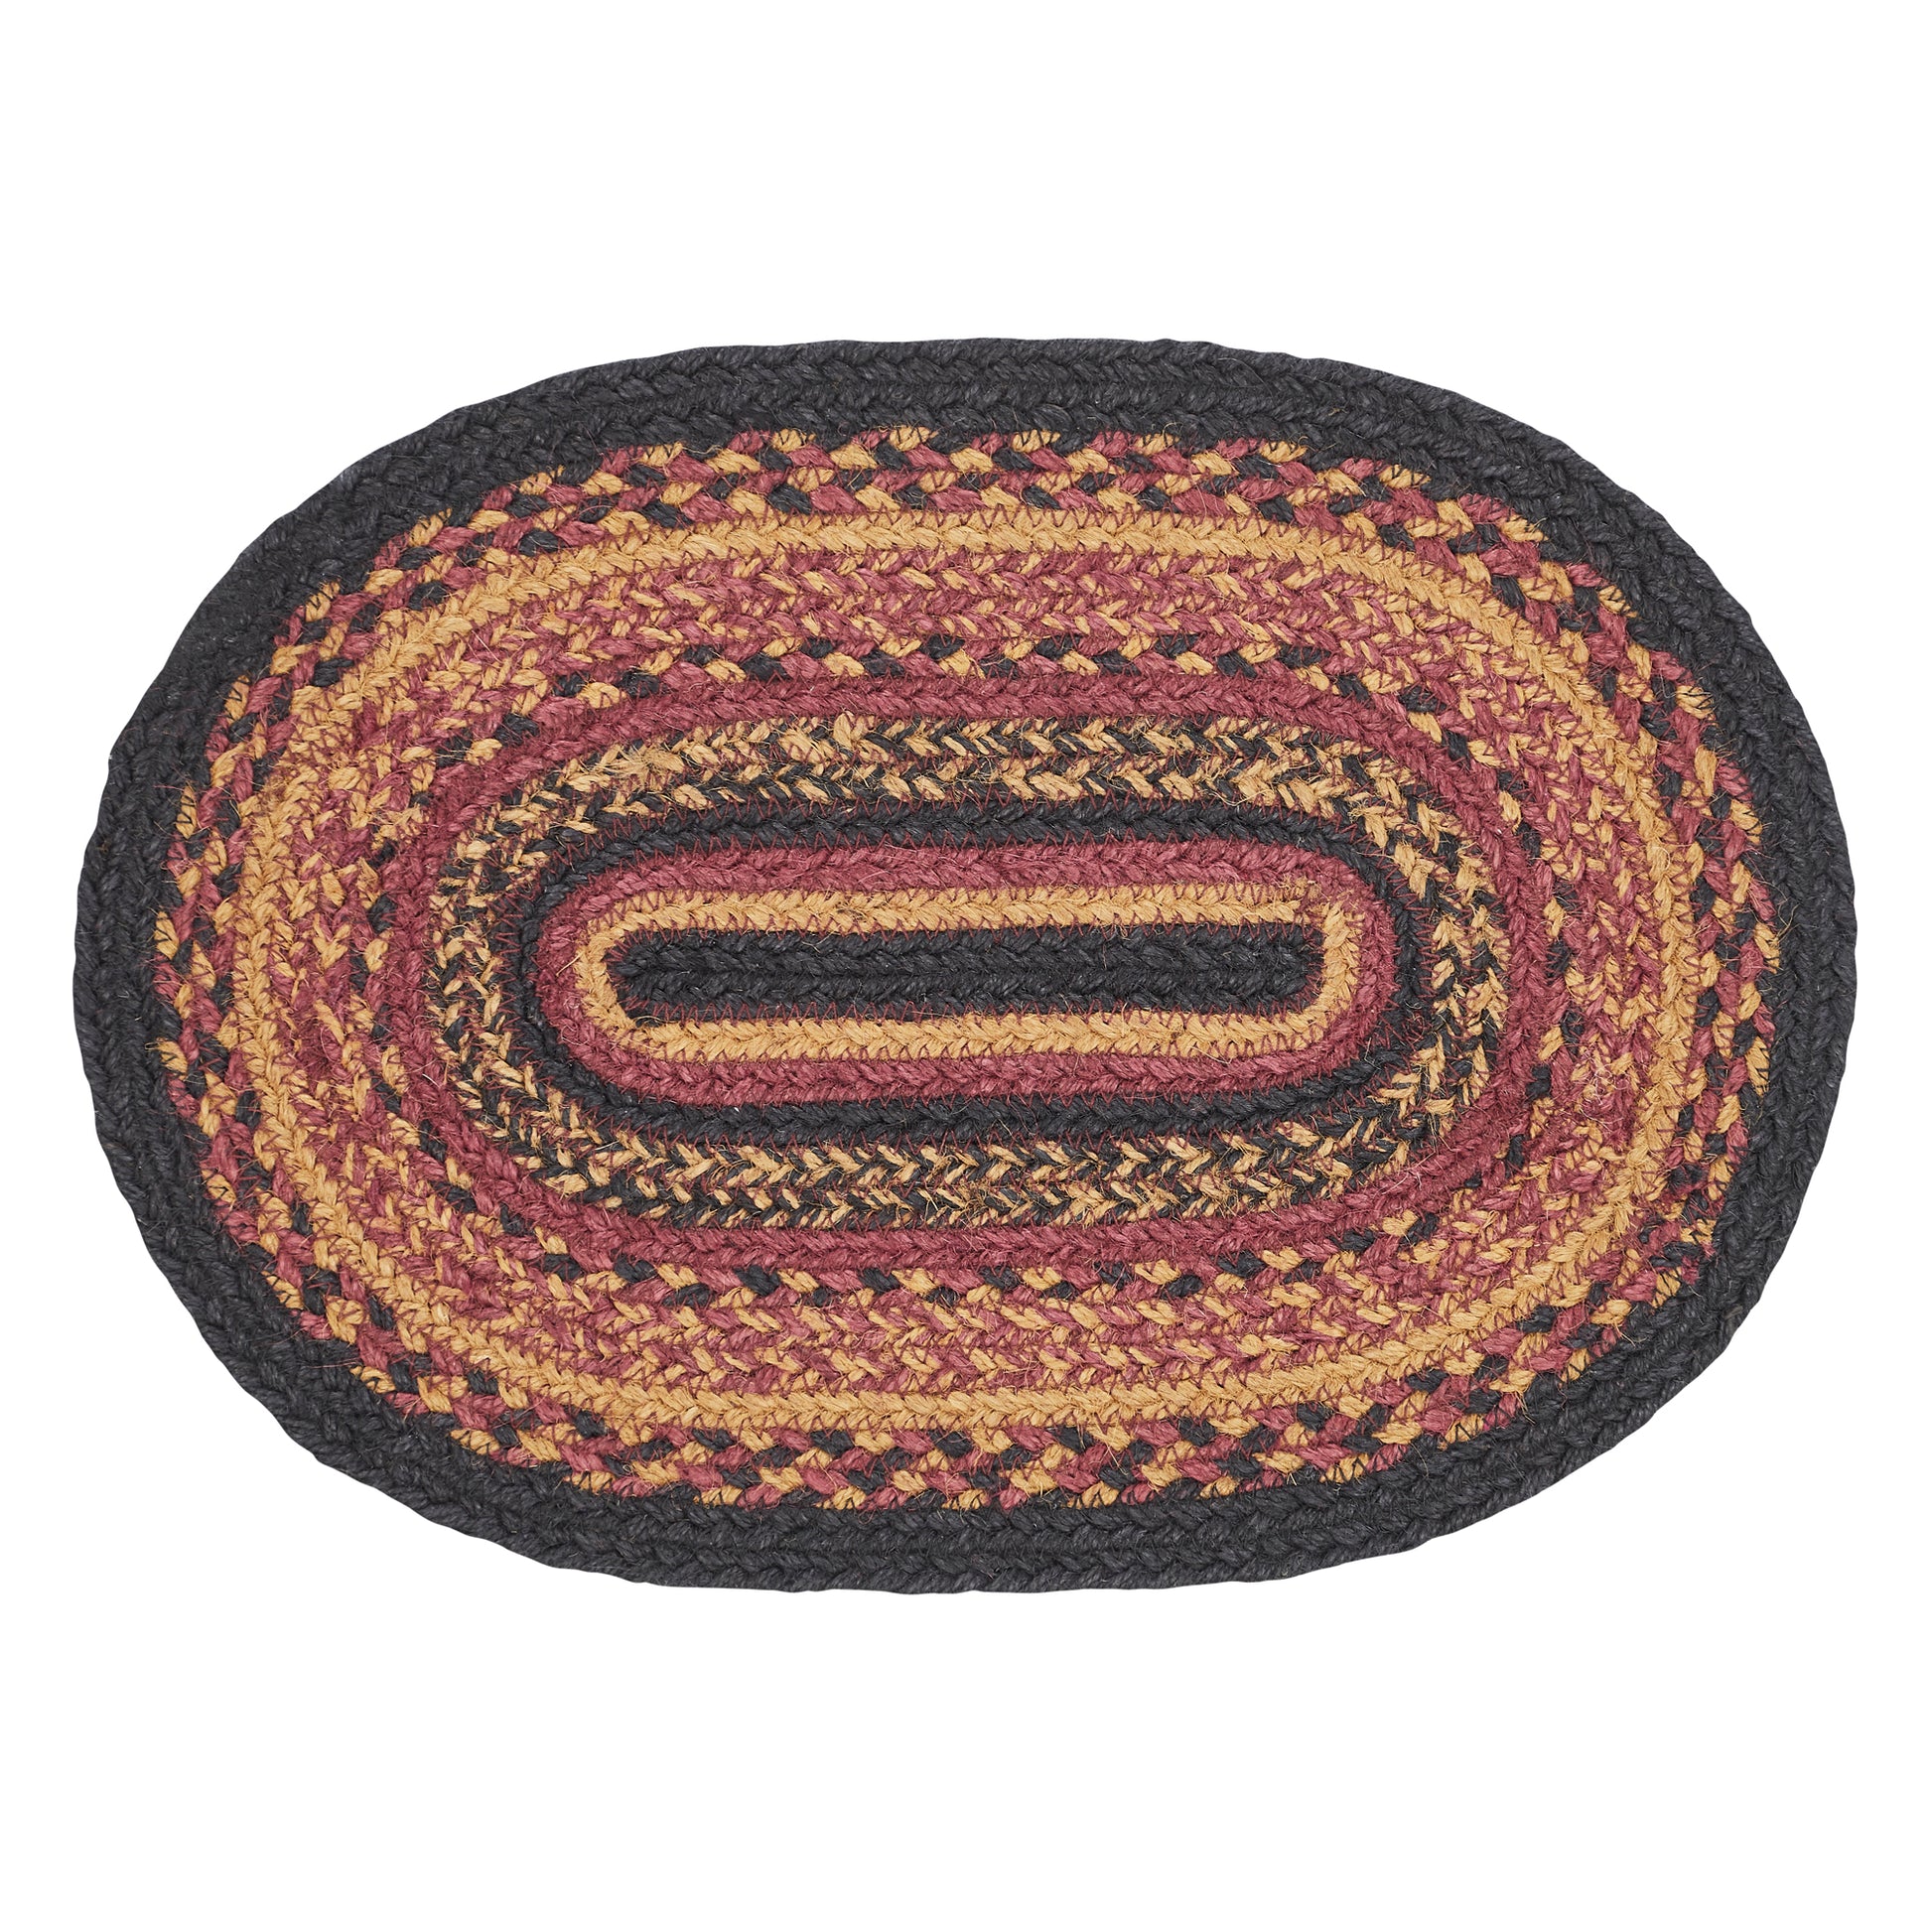 81362-Heritage-Farms-Jute-Oval-Placemat-10x15-image-4